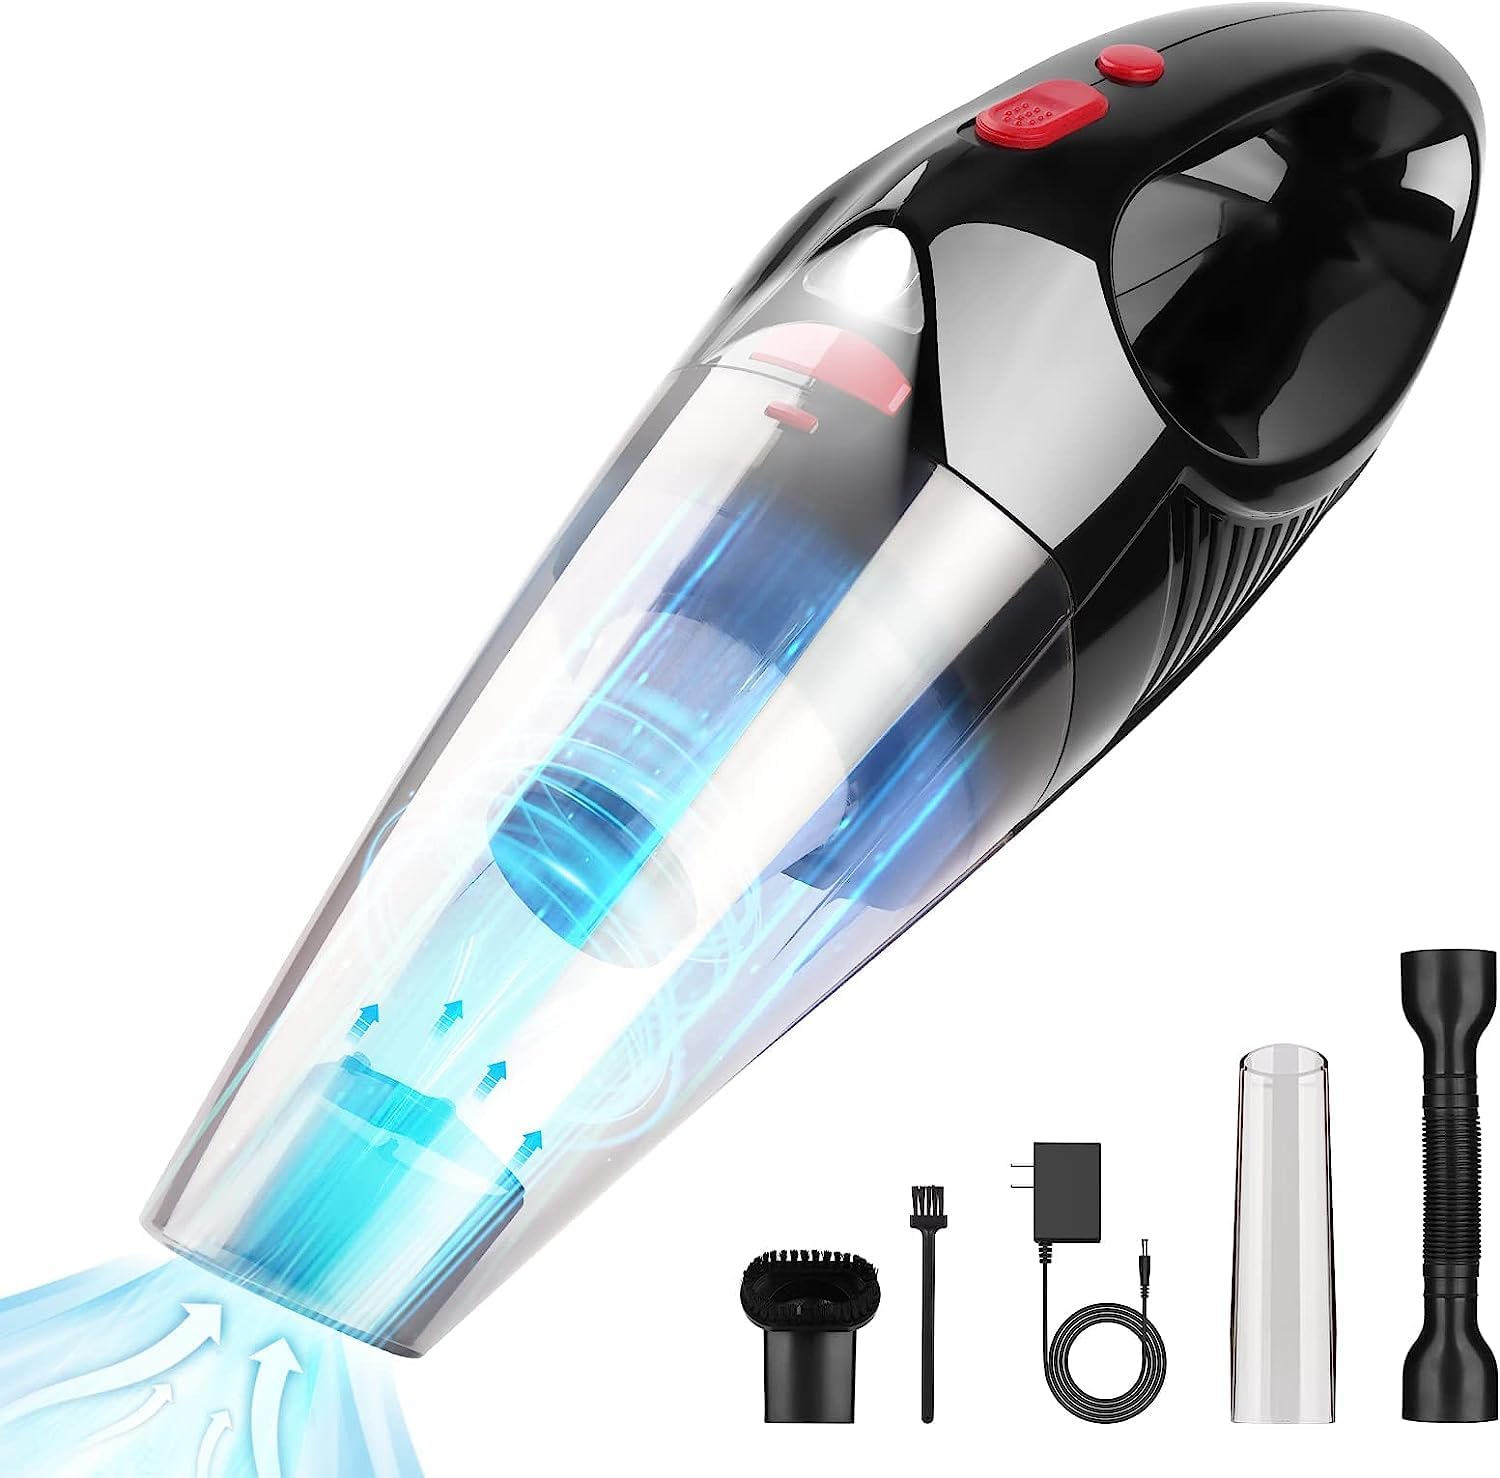 Posater Handheld Vacuum Cordless, 8500PA Strong Suction Wireless Car Vacuum Cleaner, 120W Rechargeable Hand Vacuum with LED Light